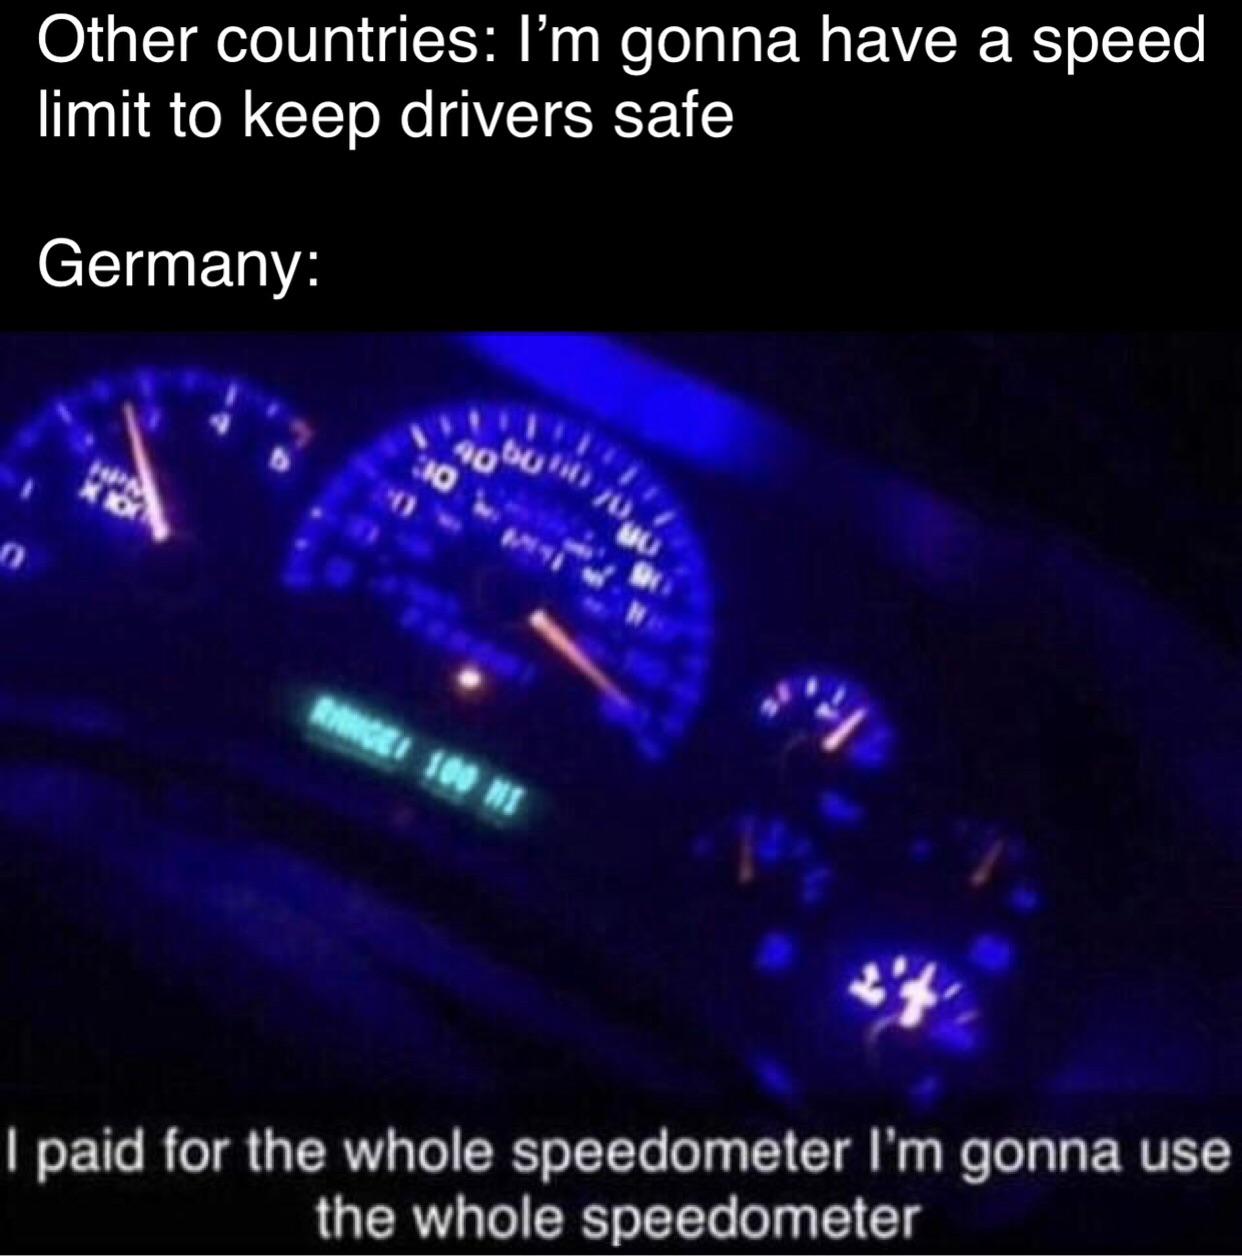 Dank Meme dank-memes cute text: Other countries: I'm gonna have a speed limit to keep drivers safe Germany: I paid for the whole speedometer I'm gonna use the whole speedometer 